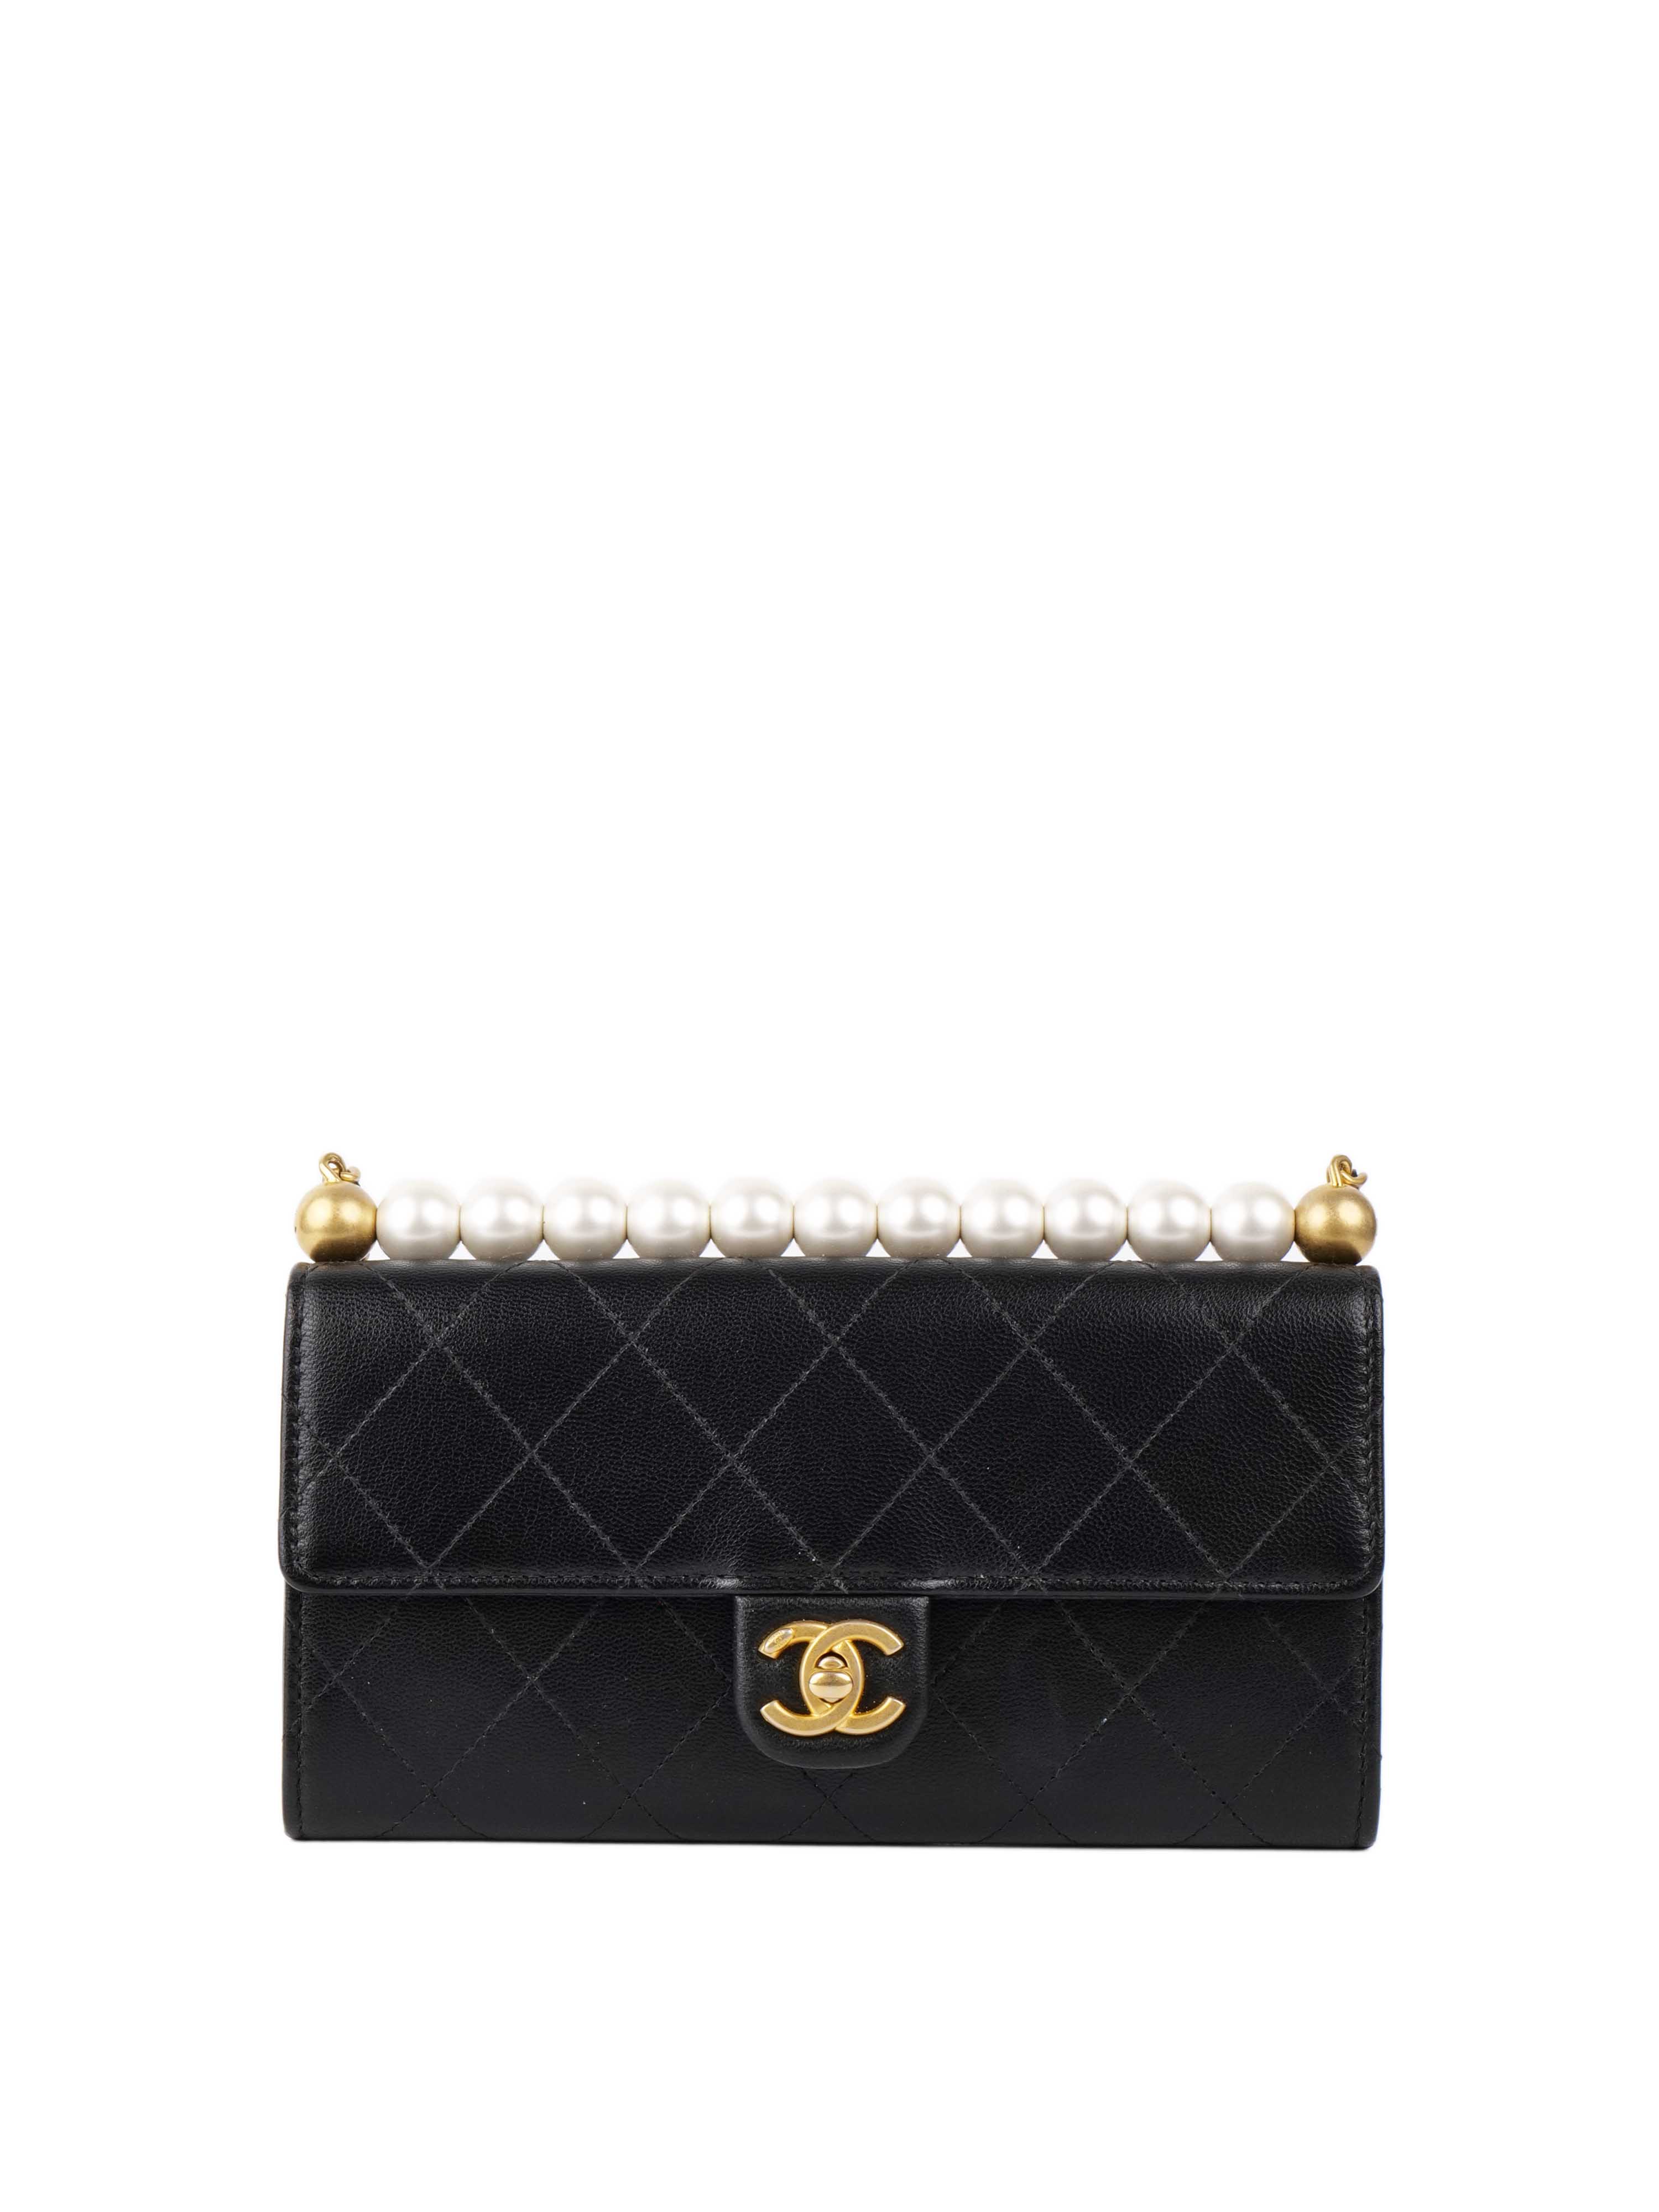 Chanel Black Wallet on Chain with Pearl Edge.